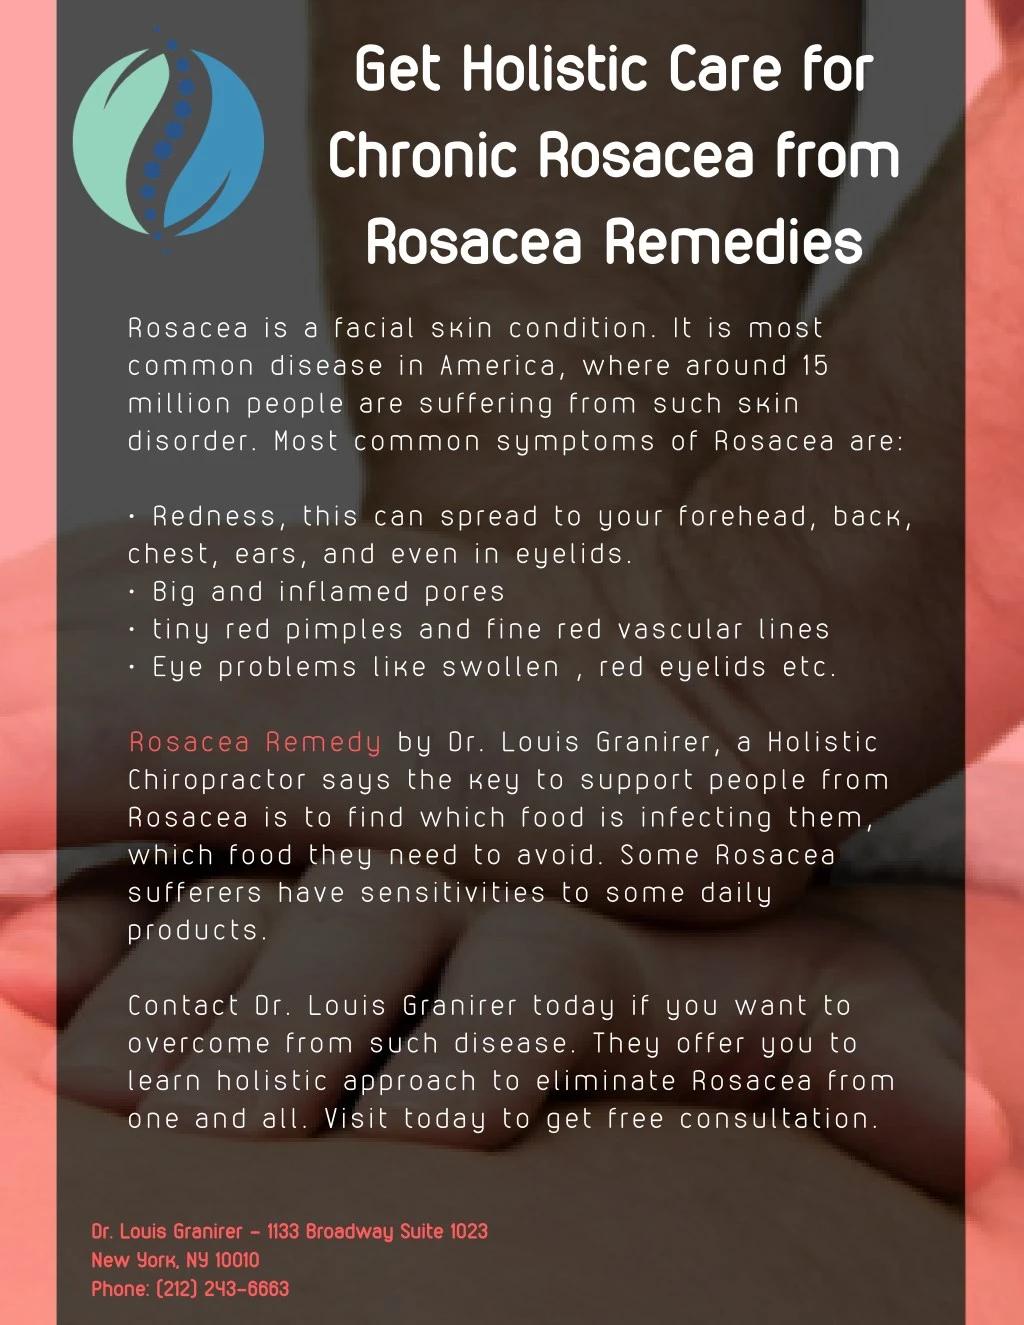 get holistic care for chronic rosacea from